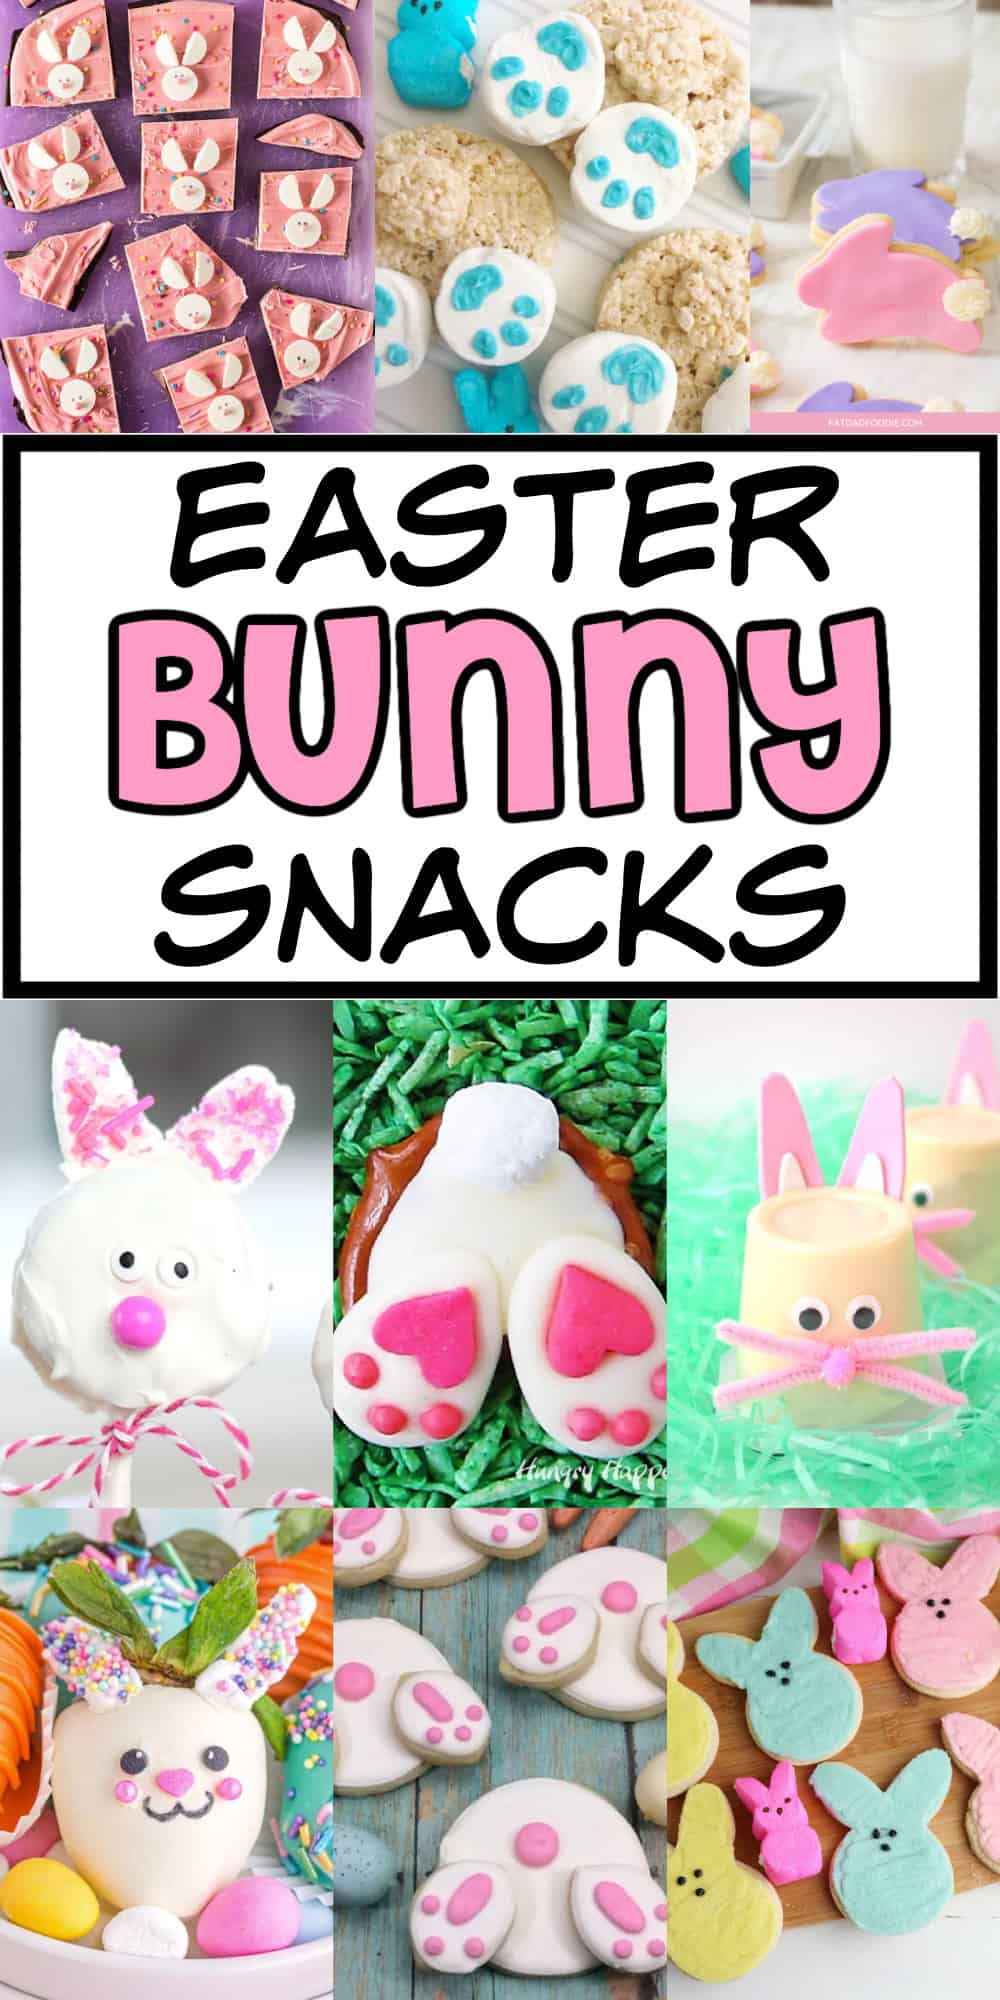 Easy Easter Bunny Desserts